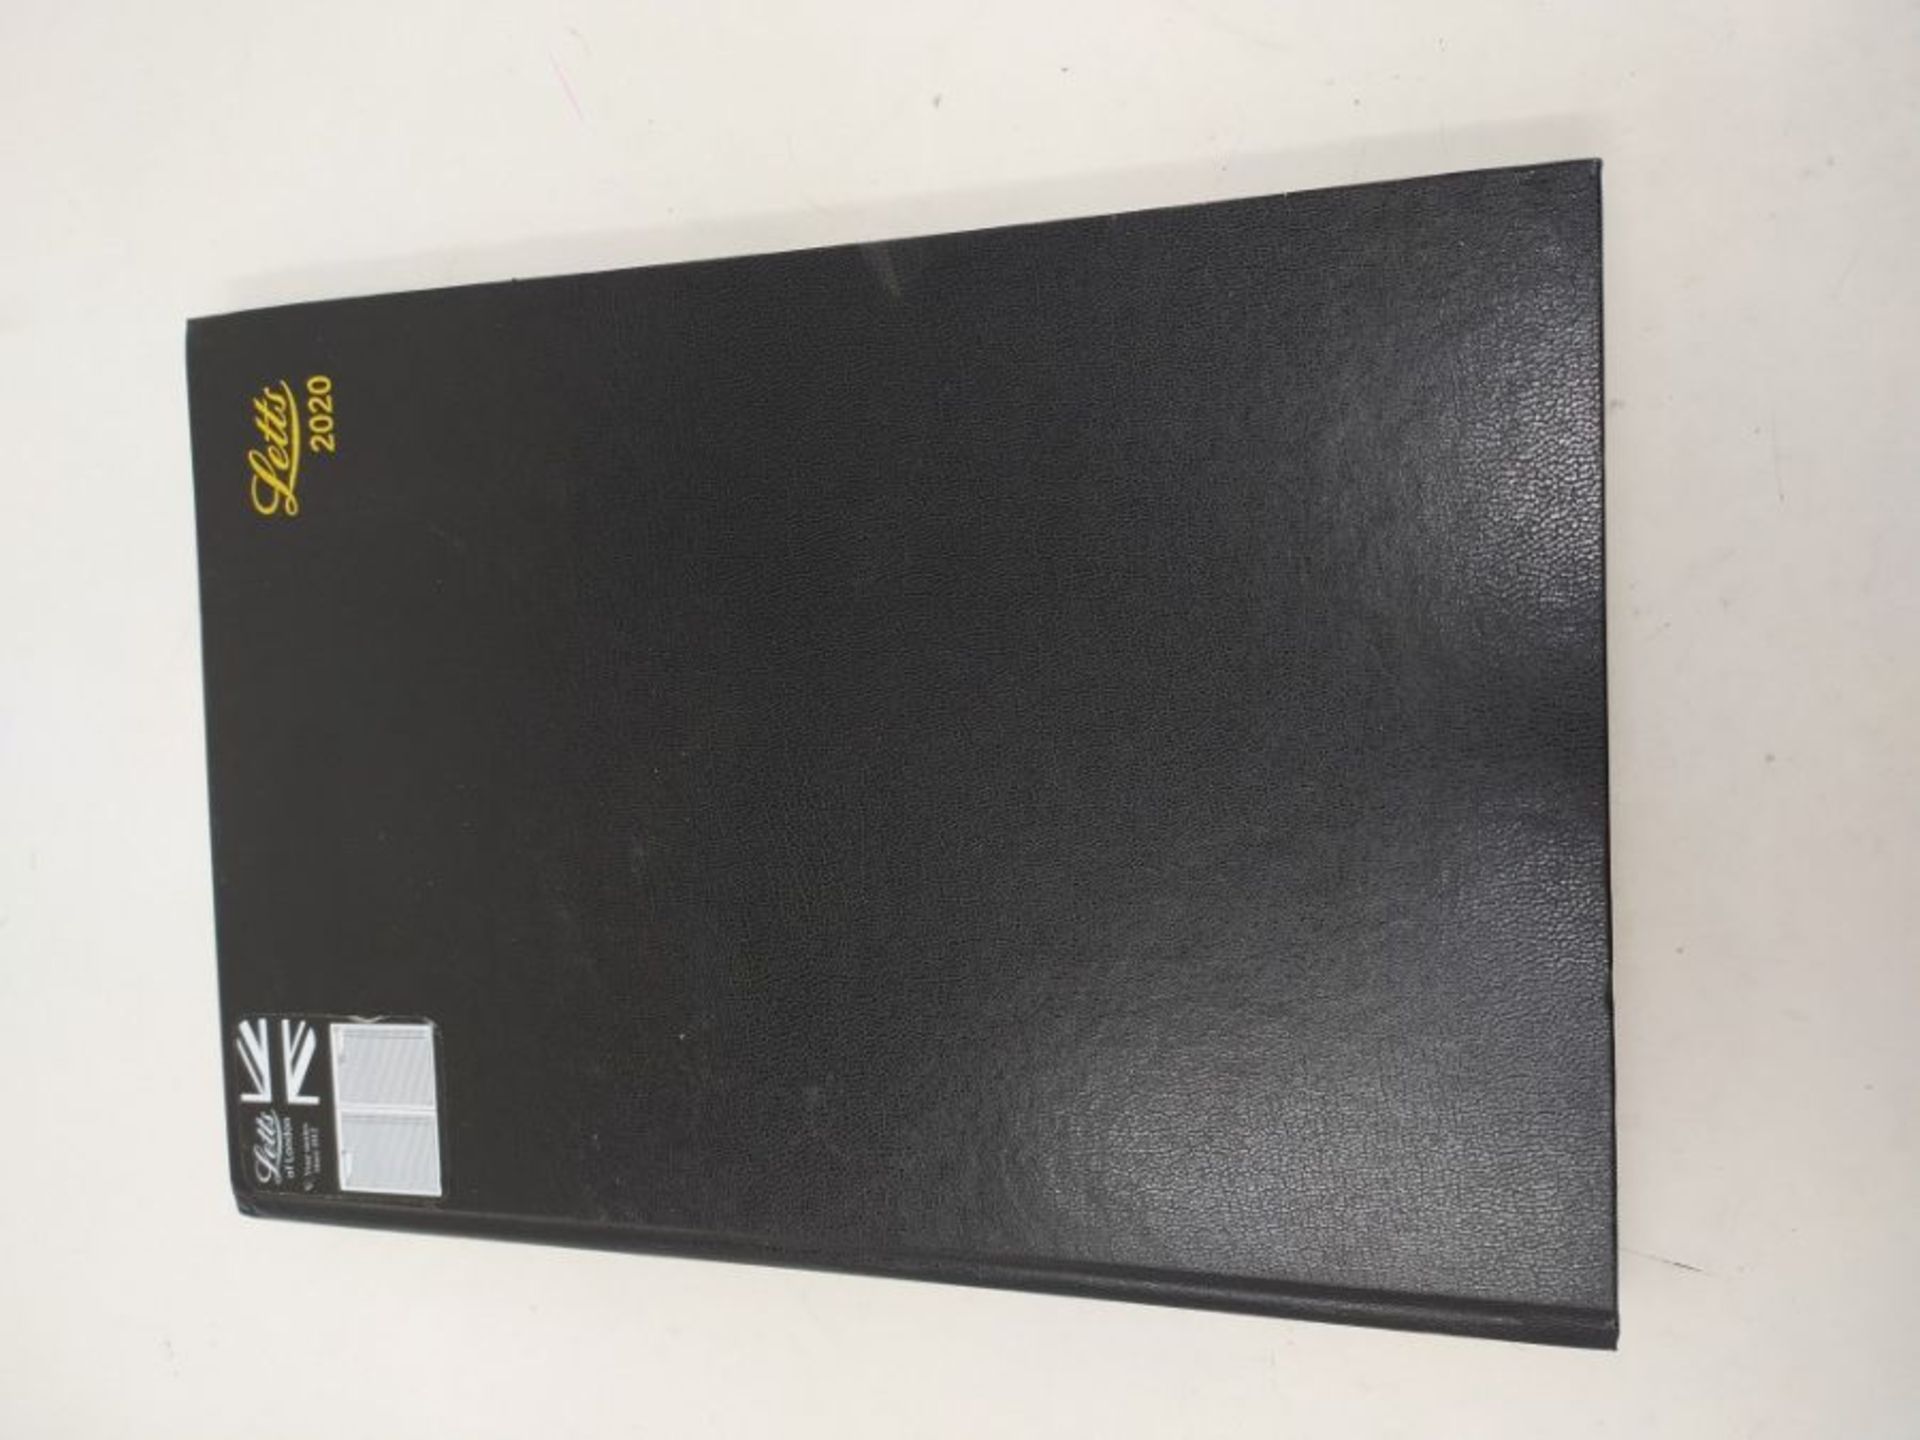 Letts Standard (Business Desk) A4 Day to A Page 2020 Diary - Black, 20-T11ZBK - Image 2 of 2